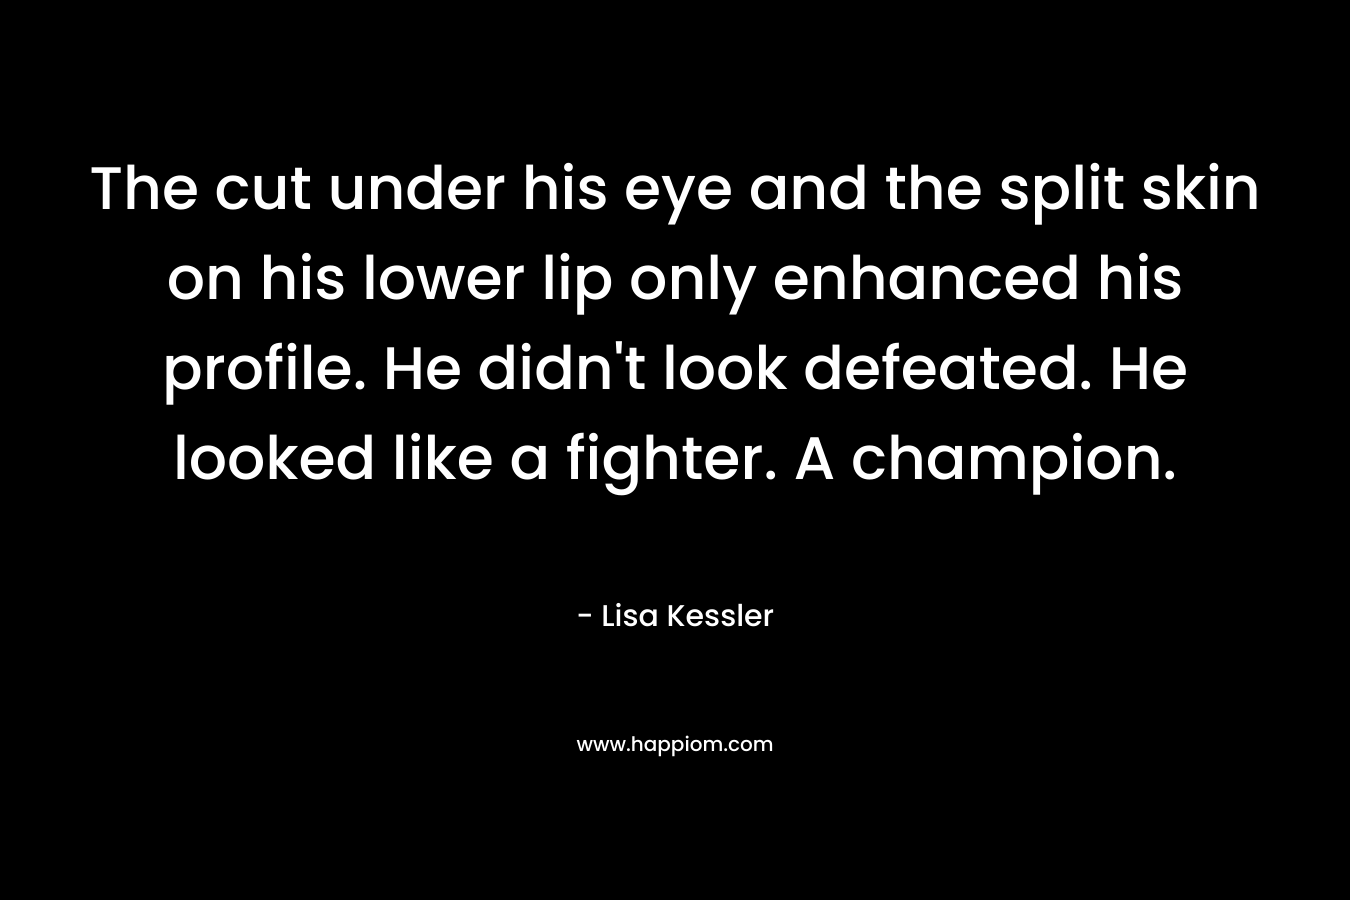 The cut under his eye and the split skin on his lower lip only enhanced his profile. He didn’t look defeated. He looked like a fighter. A champion. – Lisa Kessler